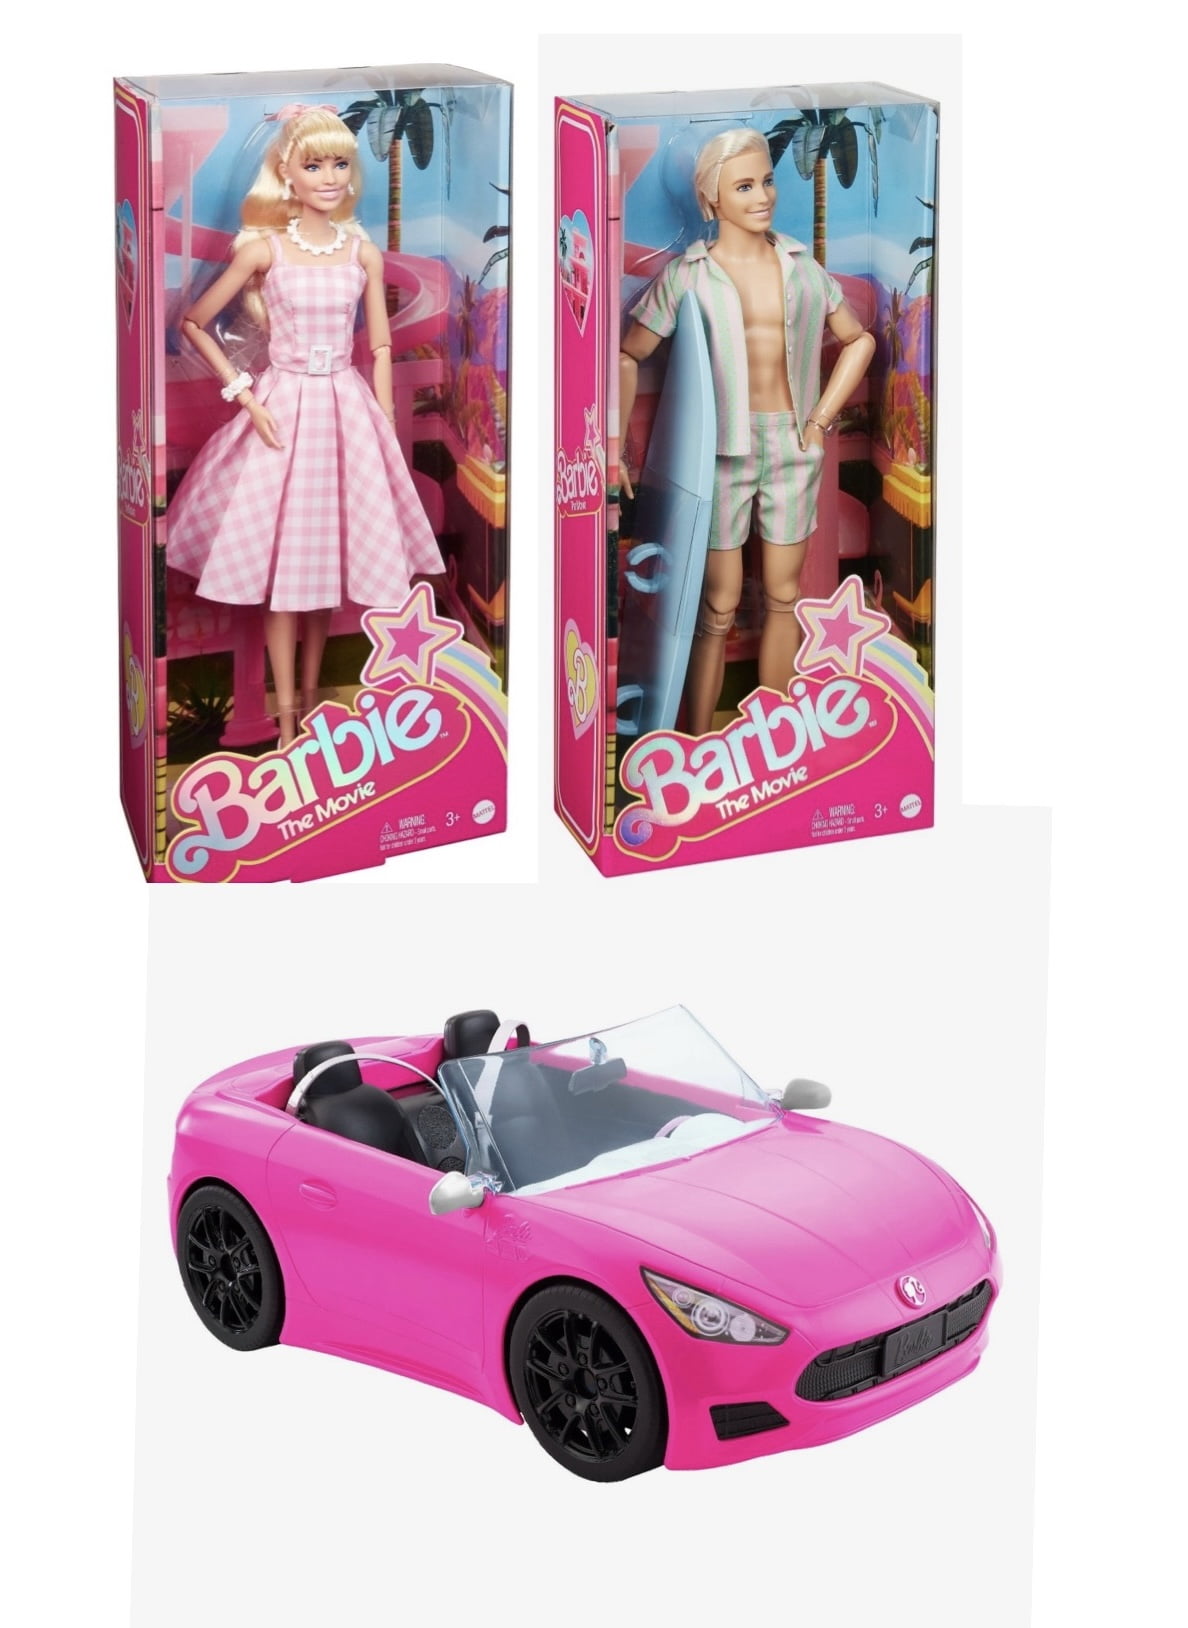 Barbie Convertible, 3 years and up Includes Toy